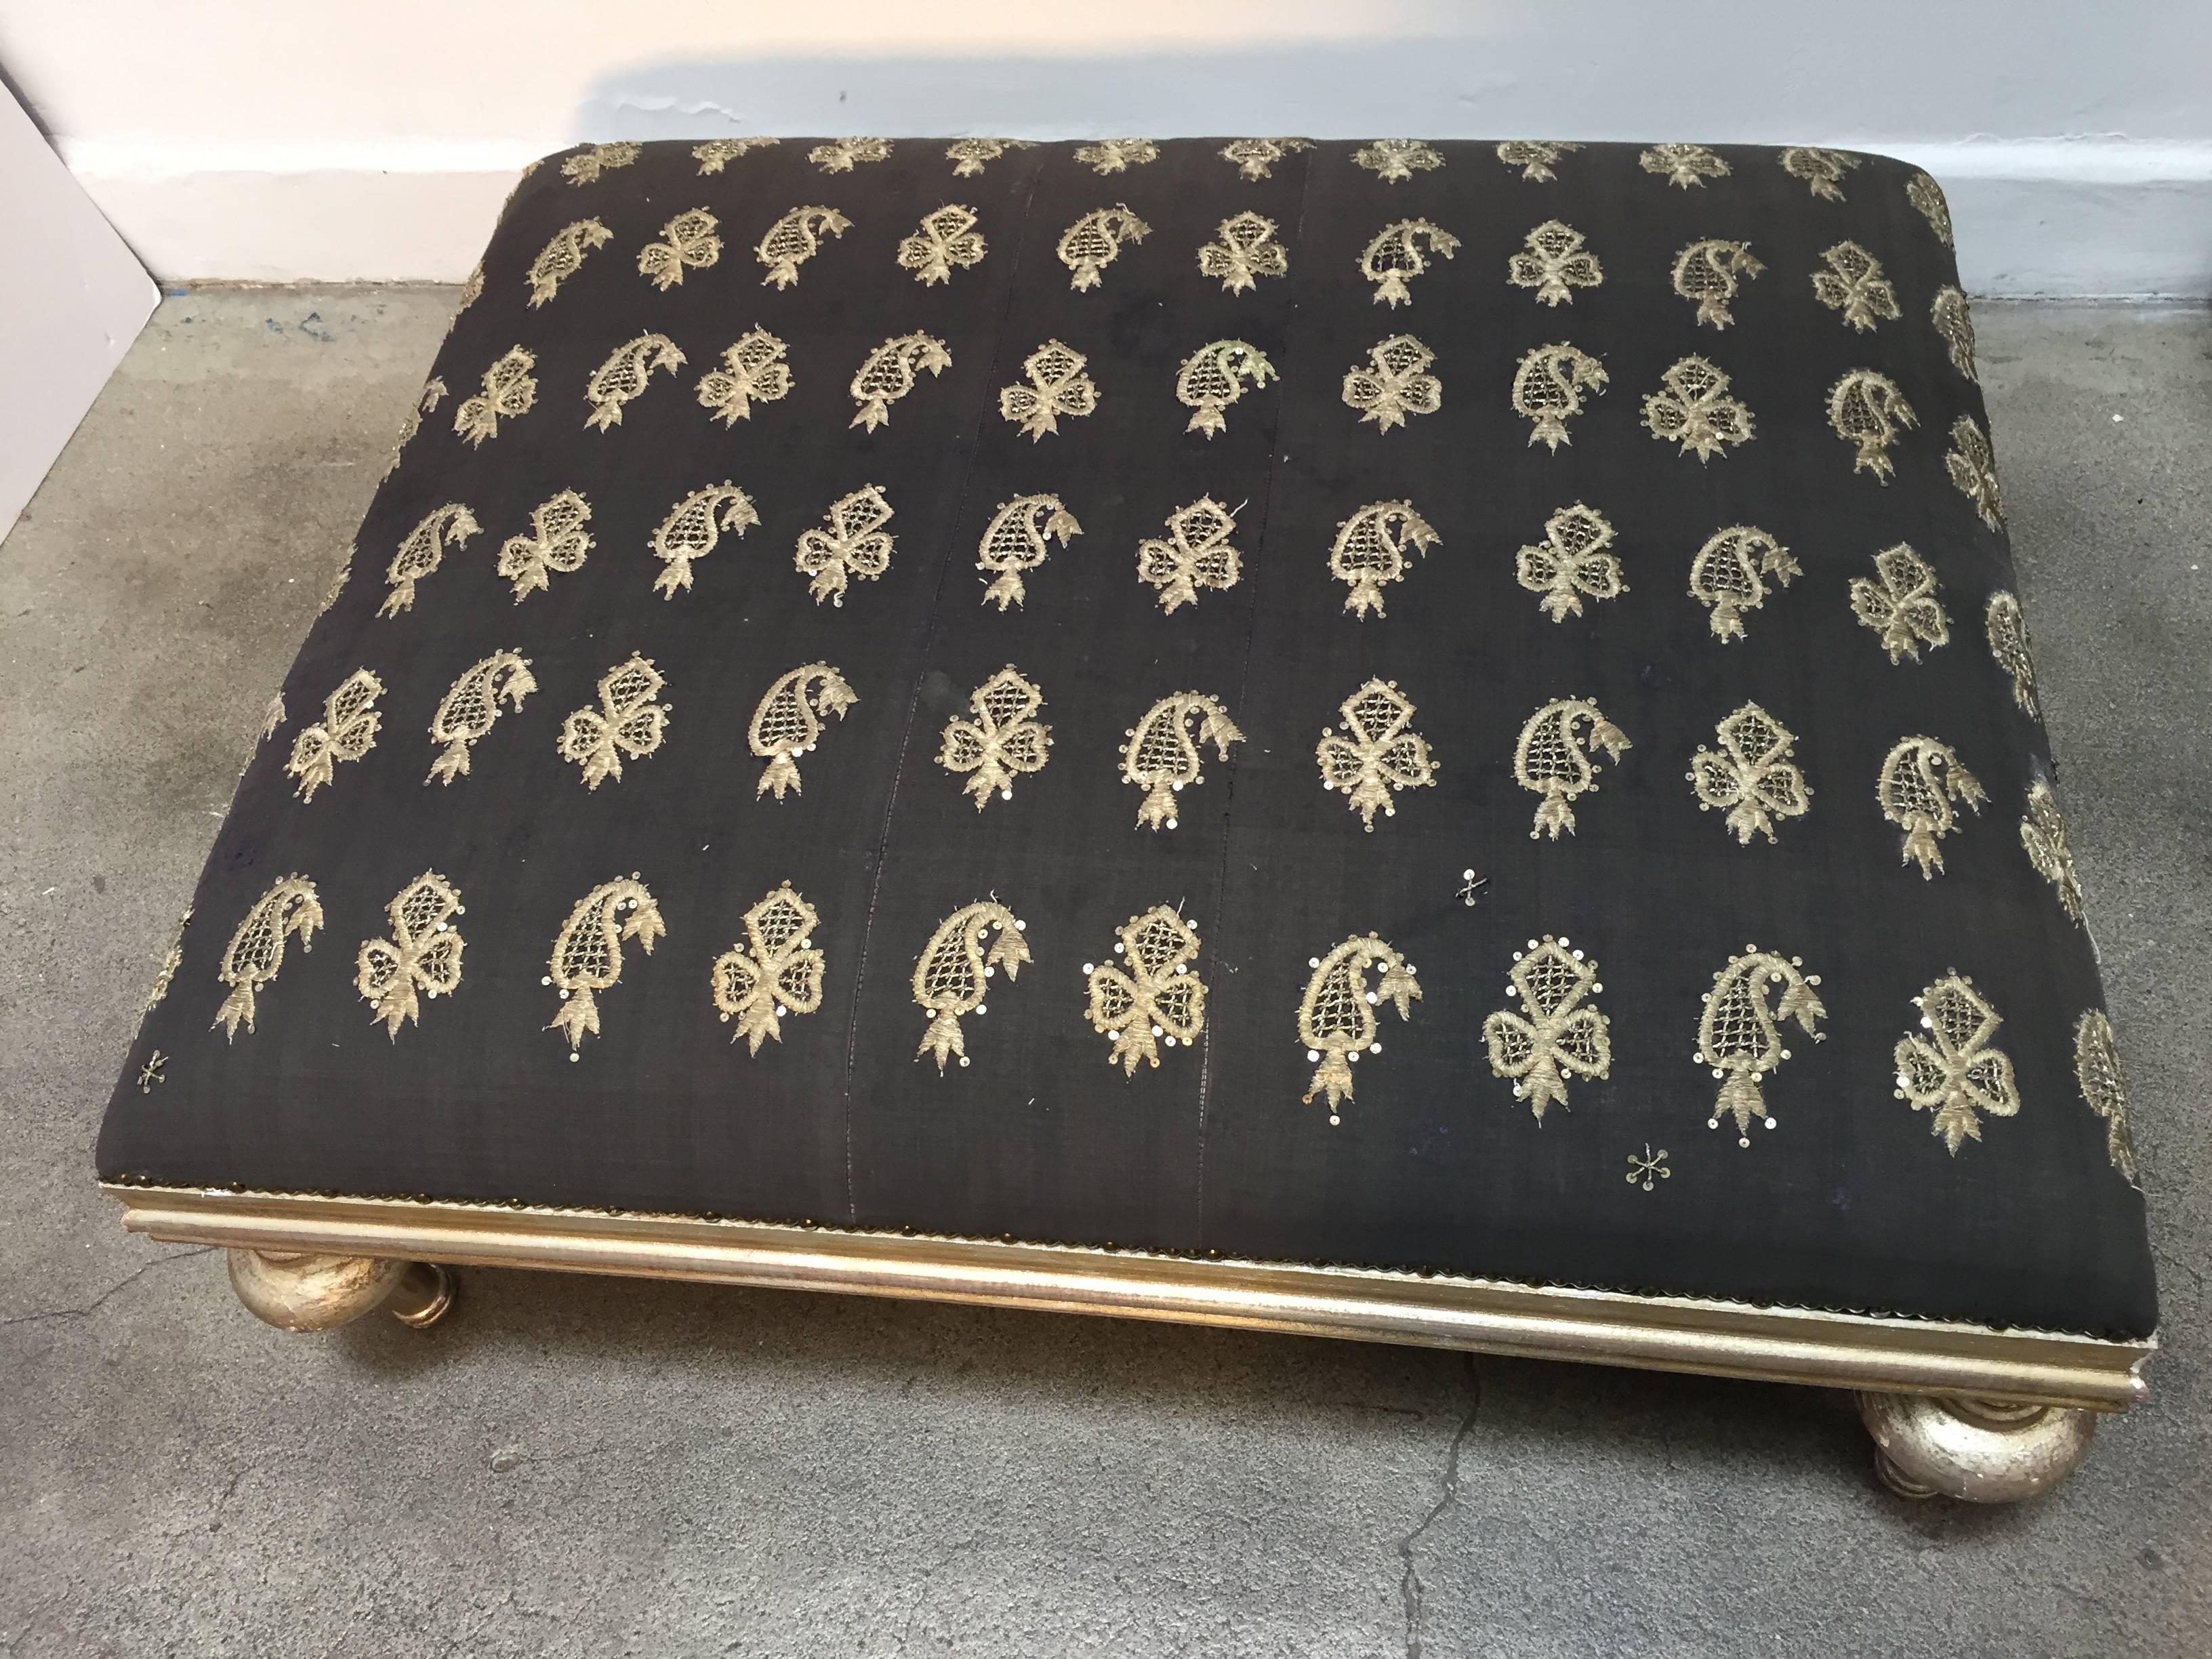 Beautiful Middle Eastern coffee table or ottoman from Lebanon.
The seat is upholstered with an old black Moorish textile embroidered with gold and silver treads. The frame has turned legs in gilt color. 
Decorative with antiqued bronze spaced